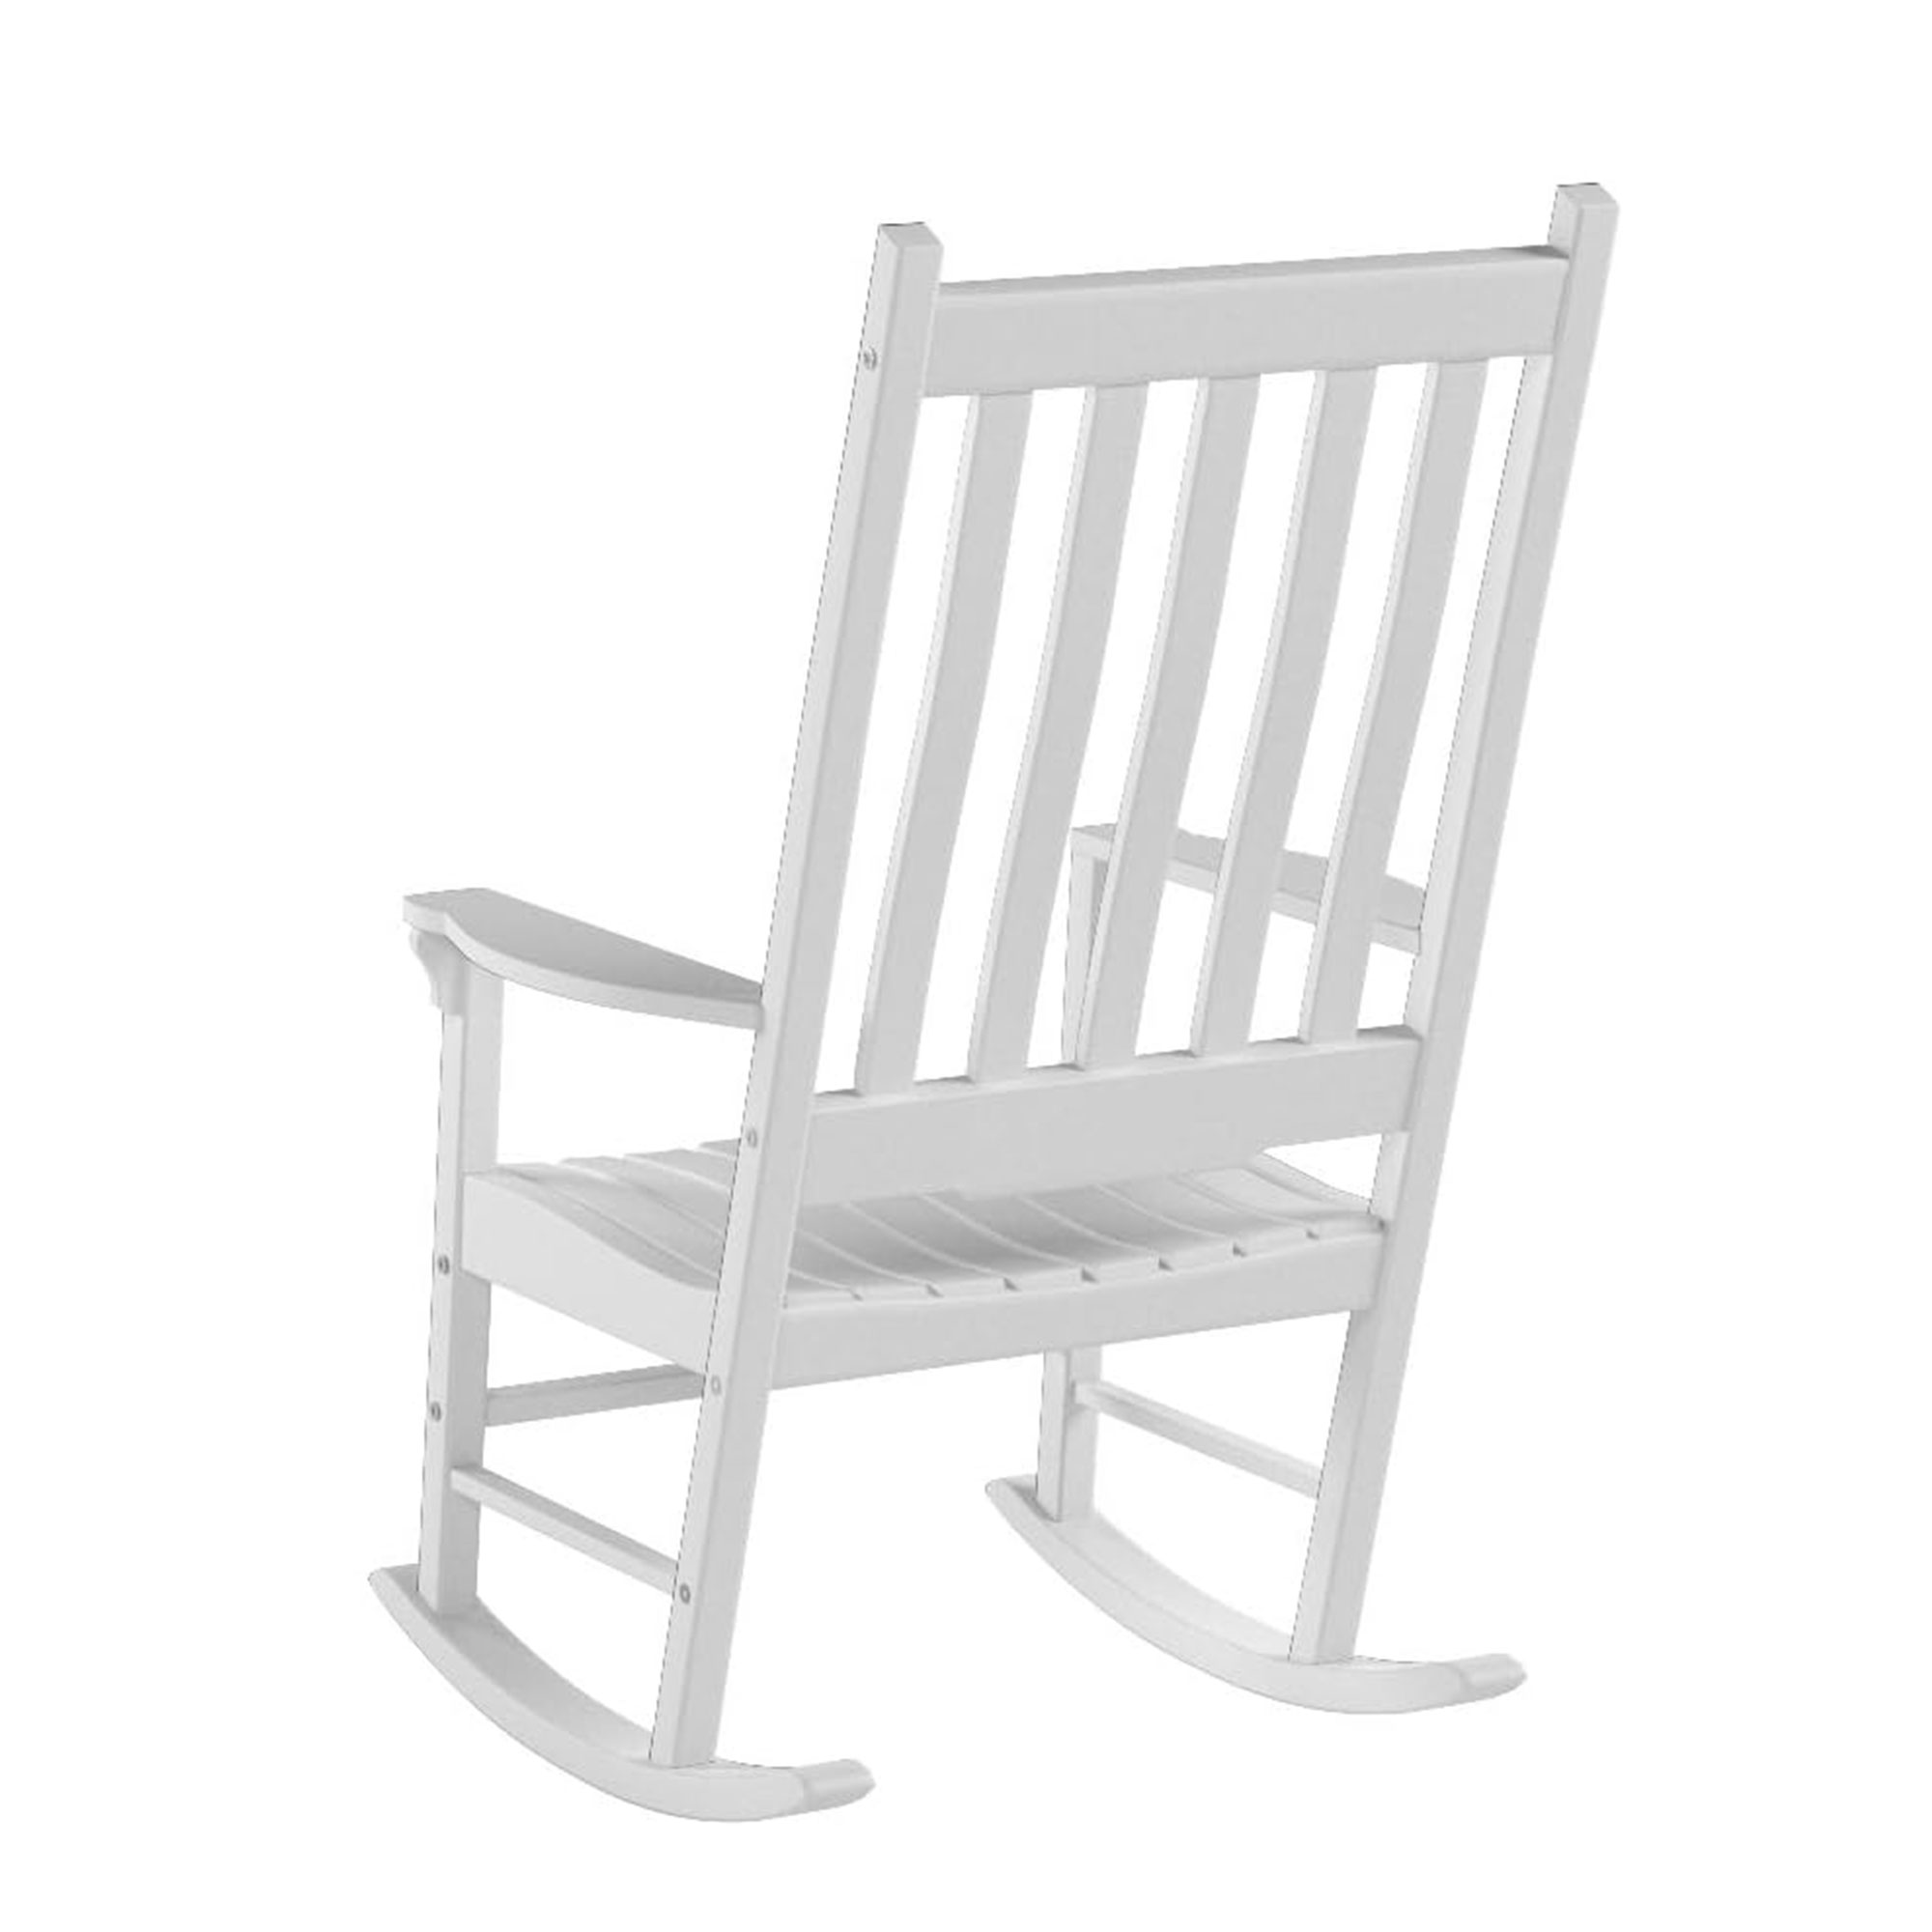 Northbeam Solid Acacia Hardwood Outdoor Patio Slatted Back Rocking Chair, White - image 5 of 11